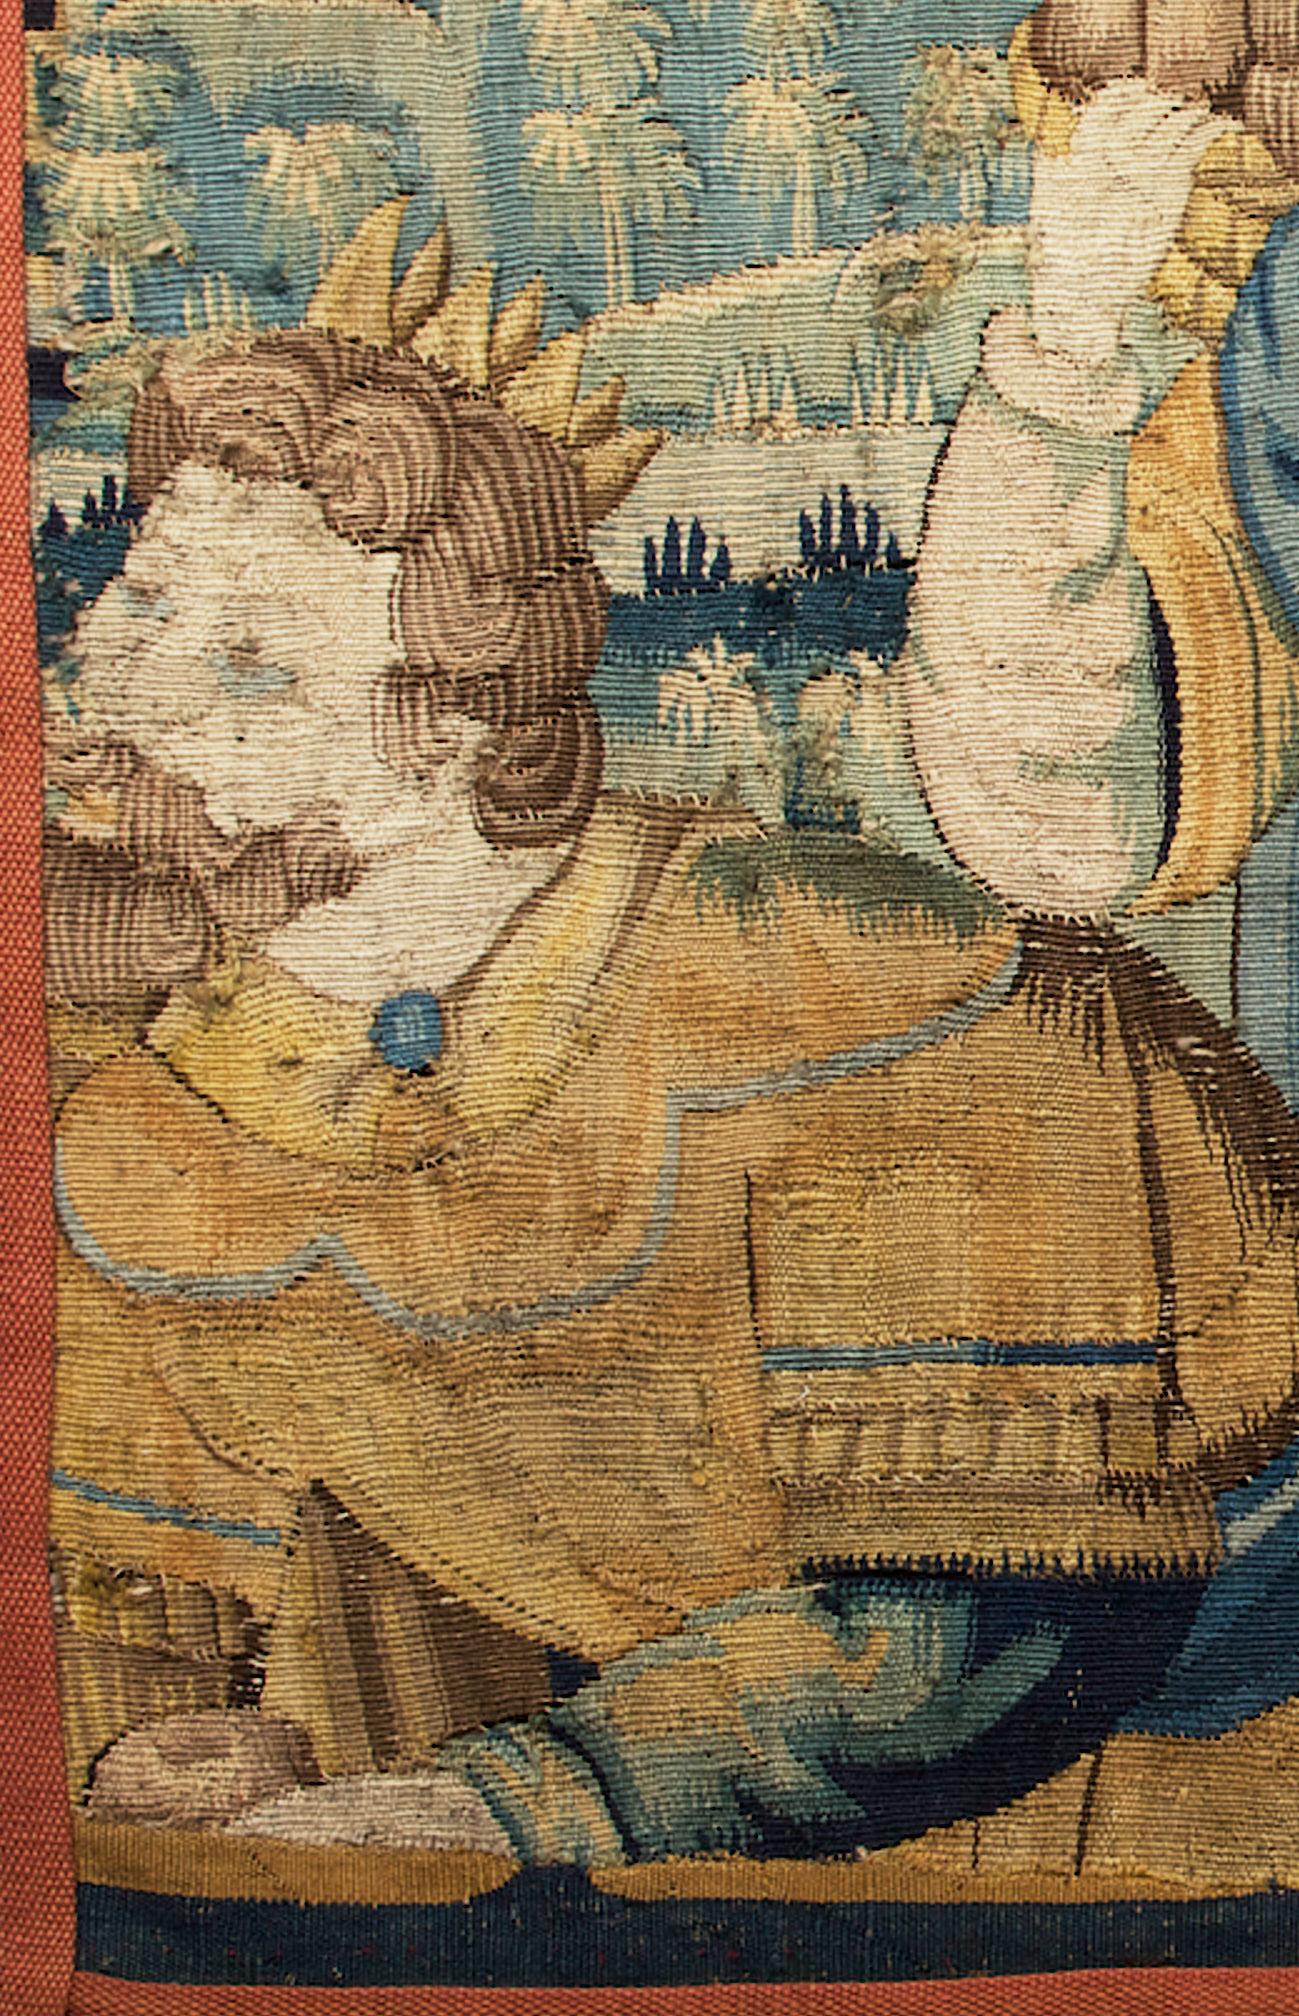 Belgian 16th Century Brussels Tapestry, circa 1600